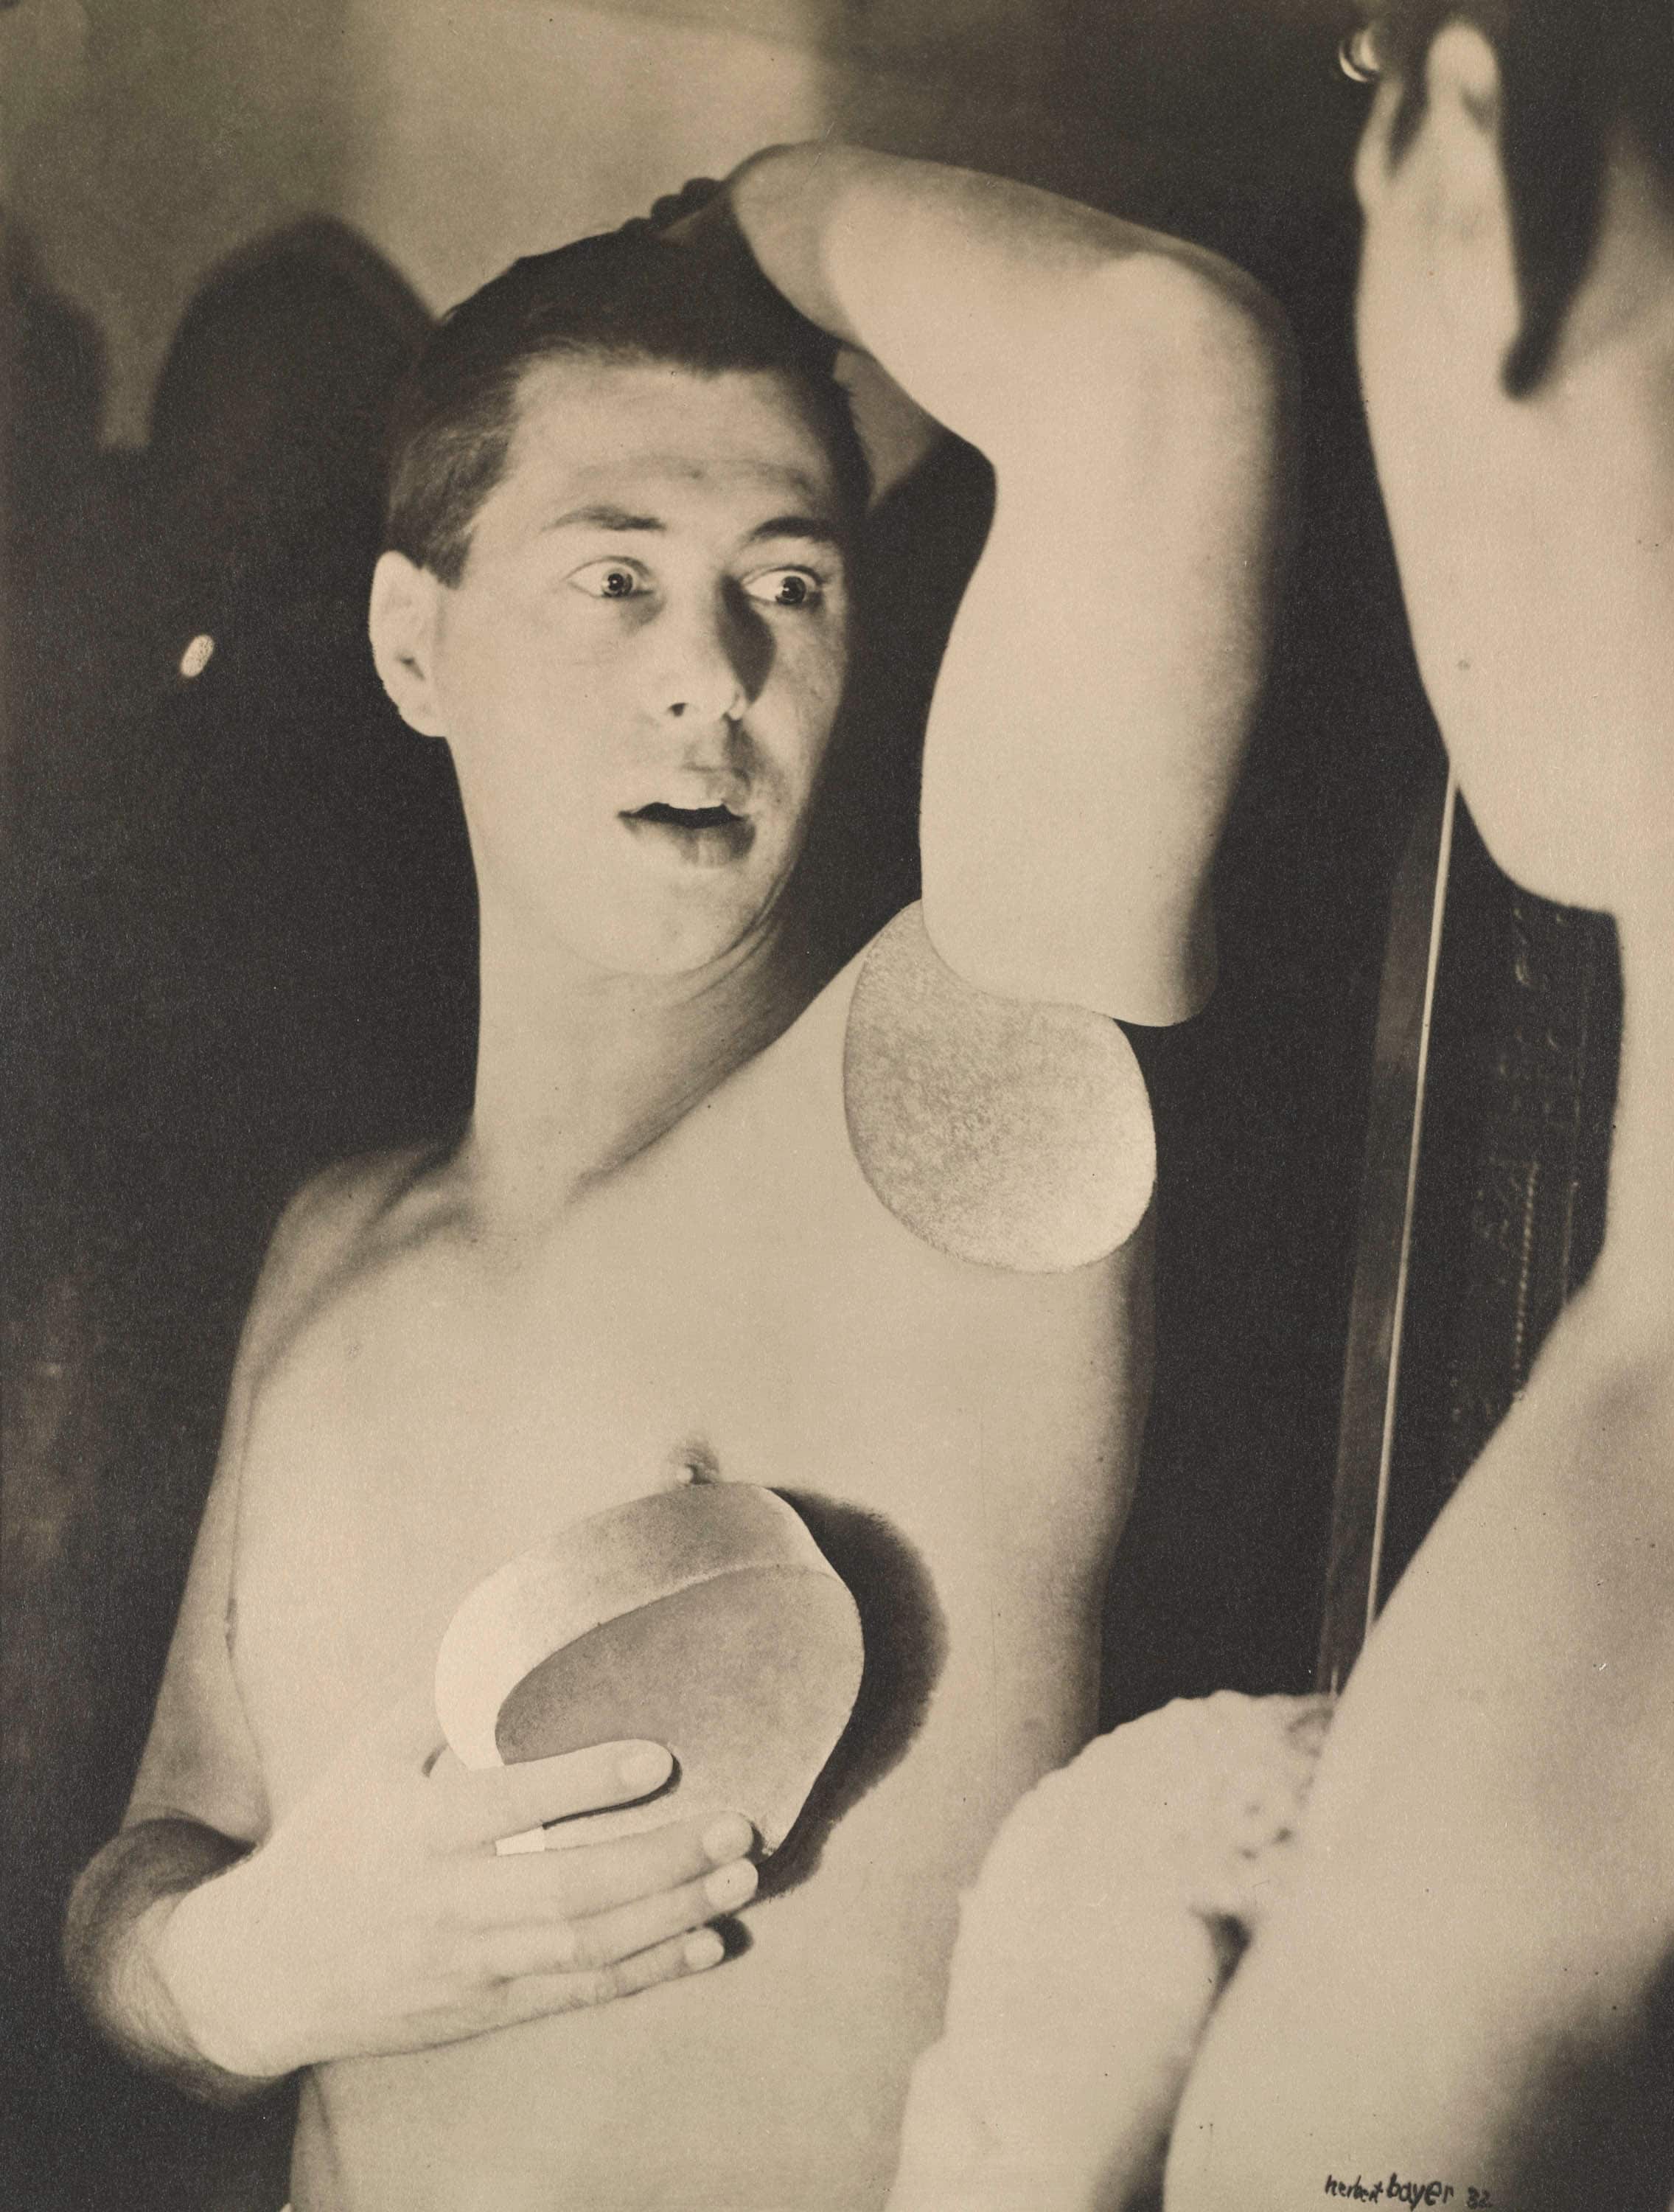 Herbert Bayer: Humanly Impossible, 1932. Stampa alla gelatina ai sali d’argento, of Modern Art38.9 x 29.3 cm. The Museum, New York Thomas Walther Collection. Acquired through the generosity of Howard Stein © 2021, ProLitteris, Zürich Digital Image © 2021 The Museum of Modern Art, New York/Scala, Florence